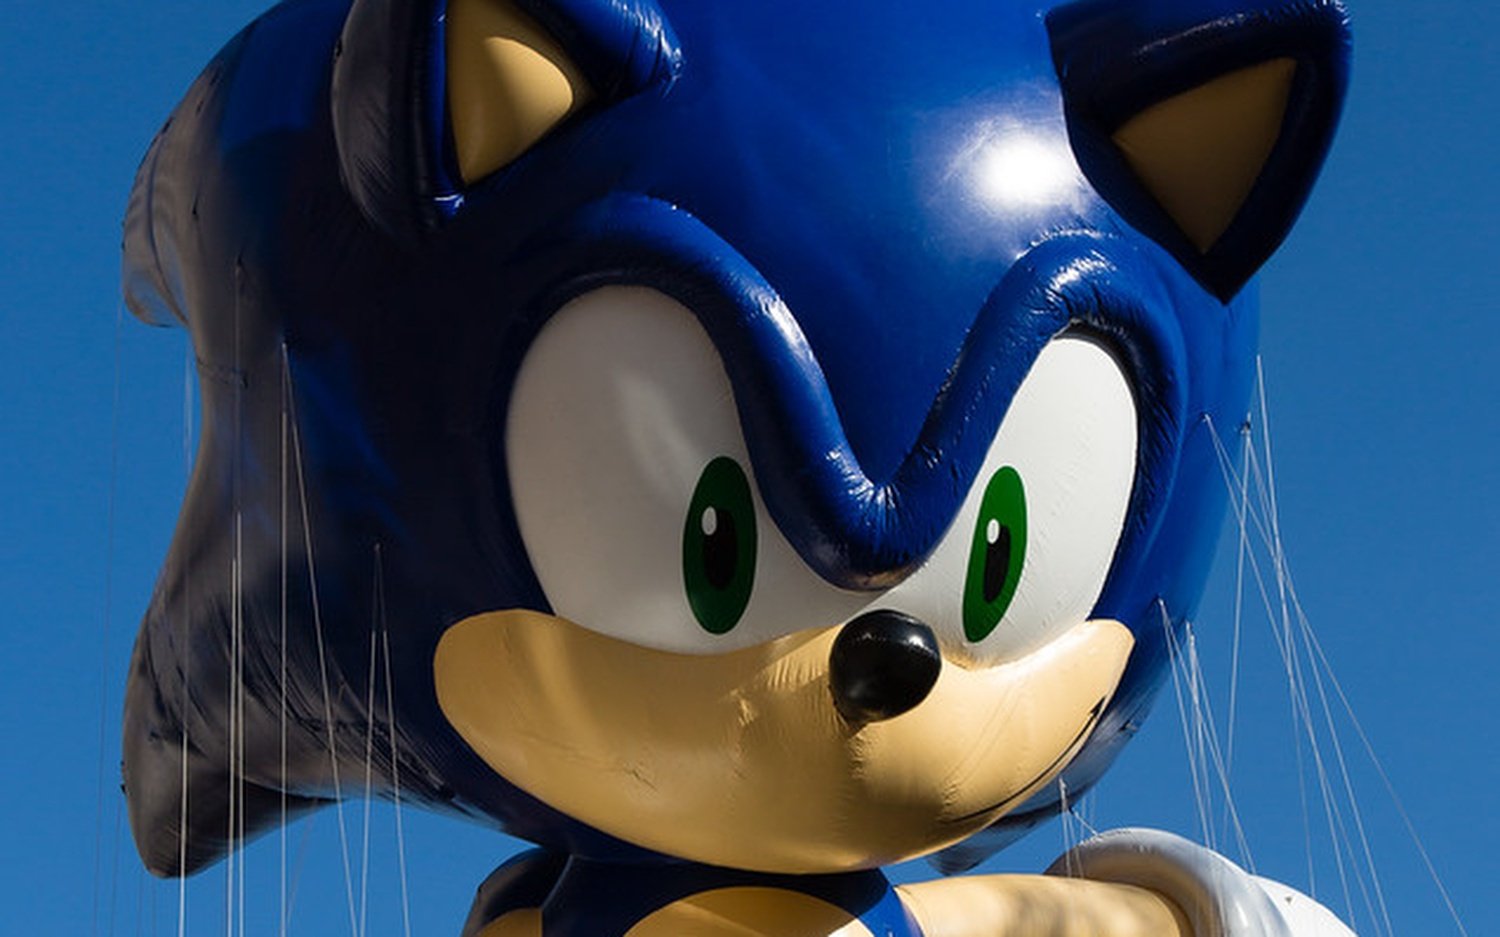 http://images.nintendolife.com/8edbf3a221791/heres-sonic-having-a-more-successful-time-in-the-2012-parade.original.jpg